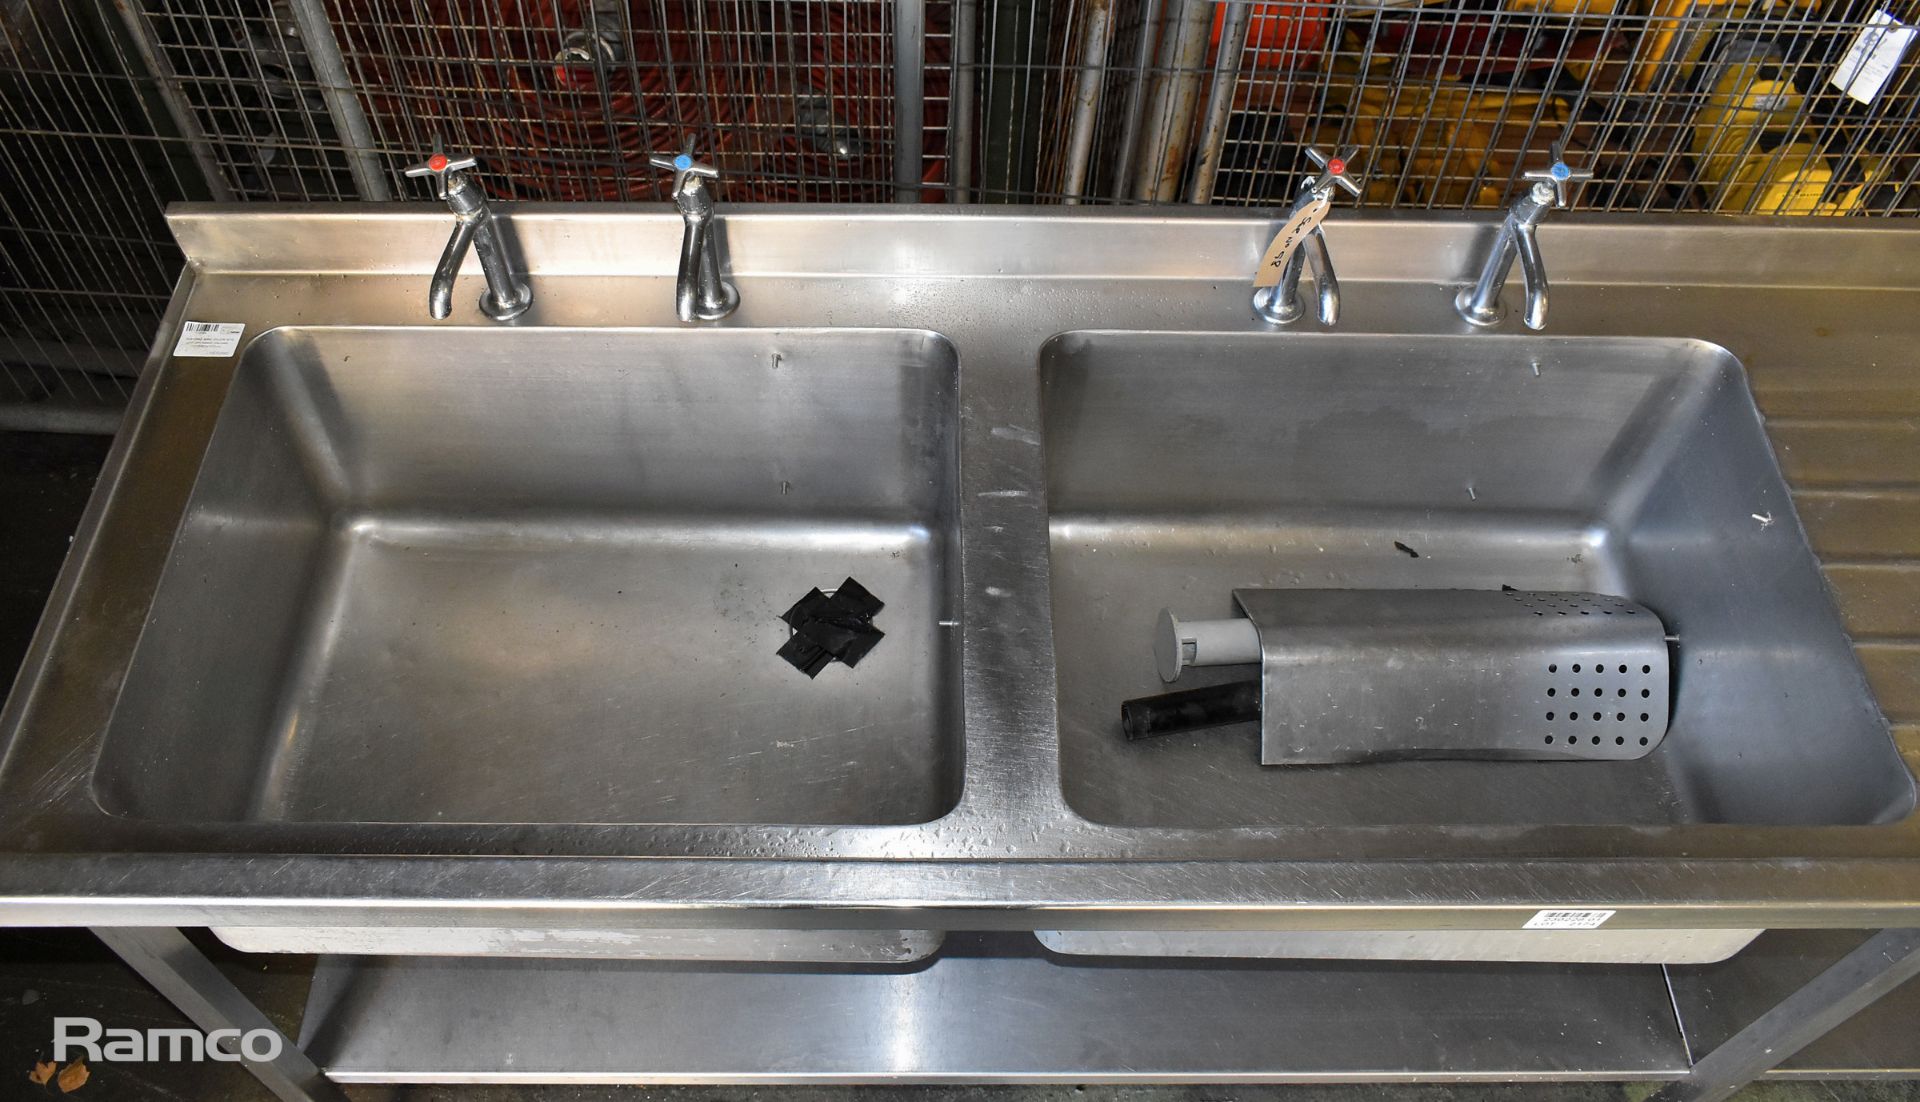 Stainless steel double sink unit with waste disposal - 310x80x100cm - Image 3 of 8